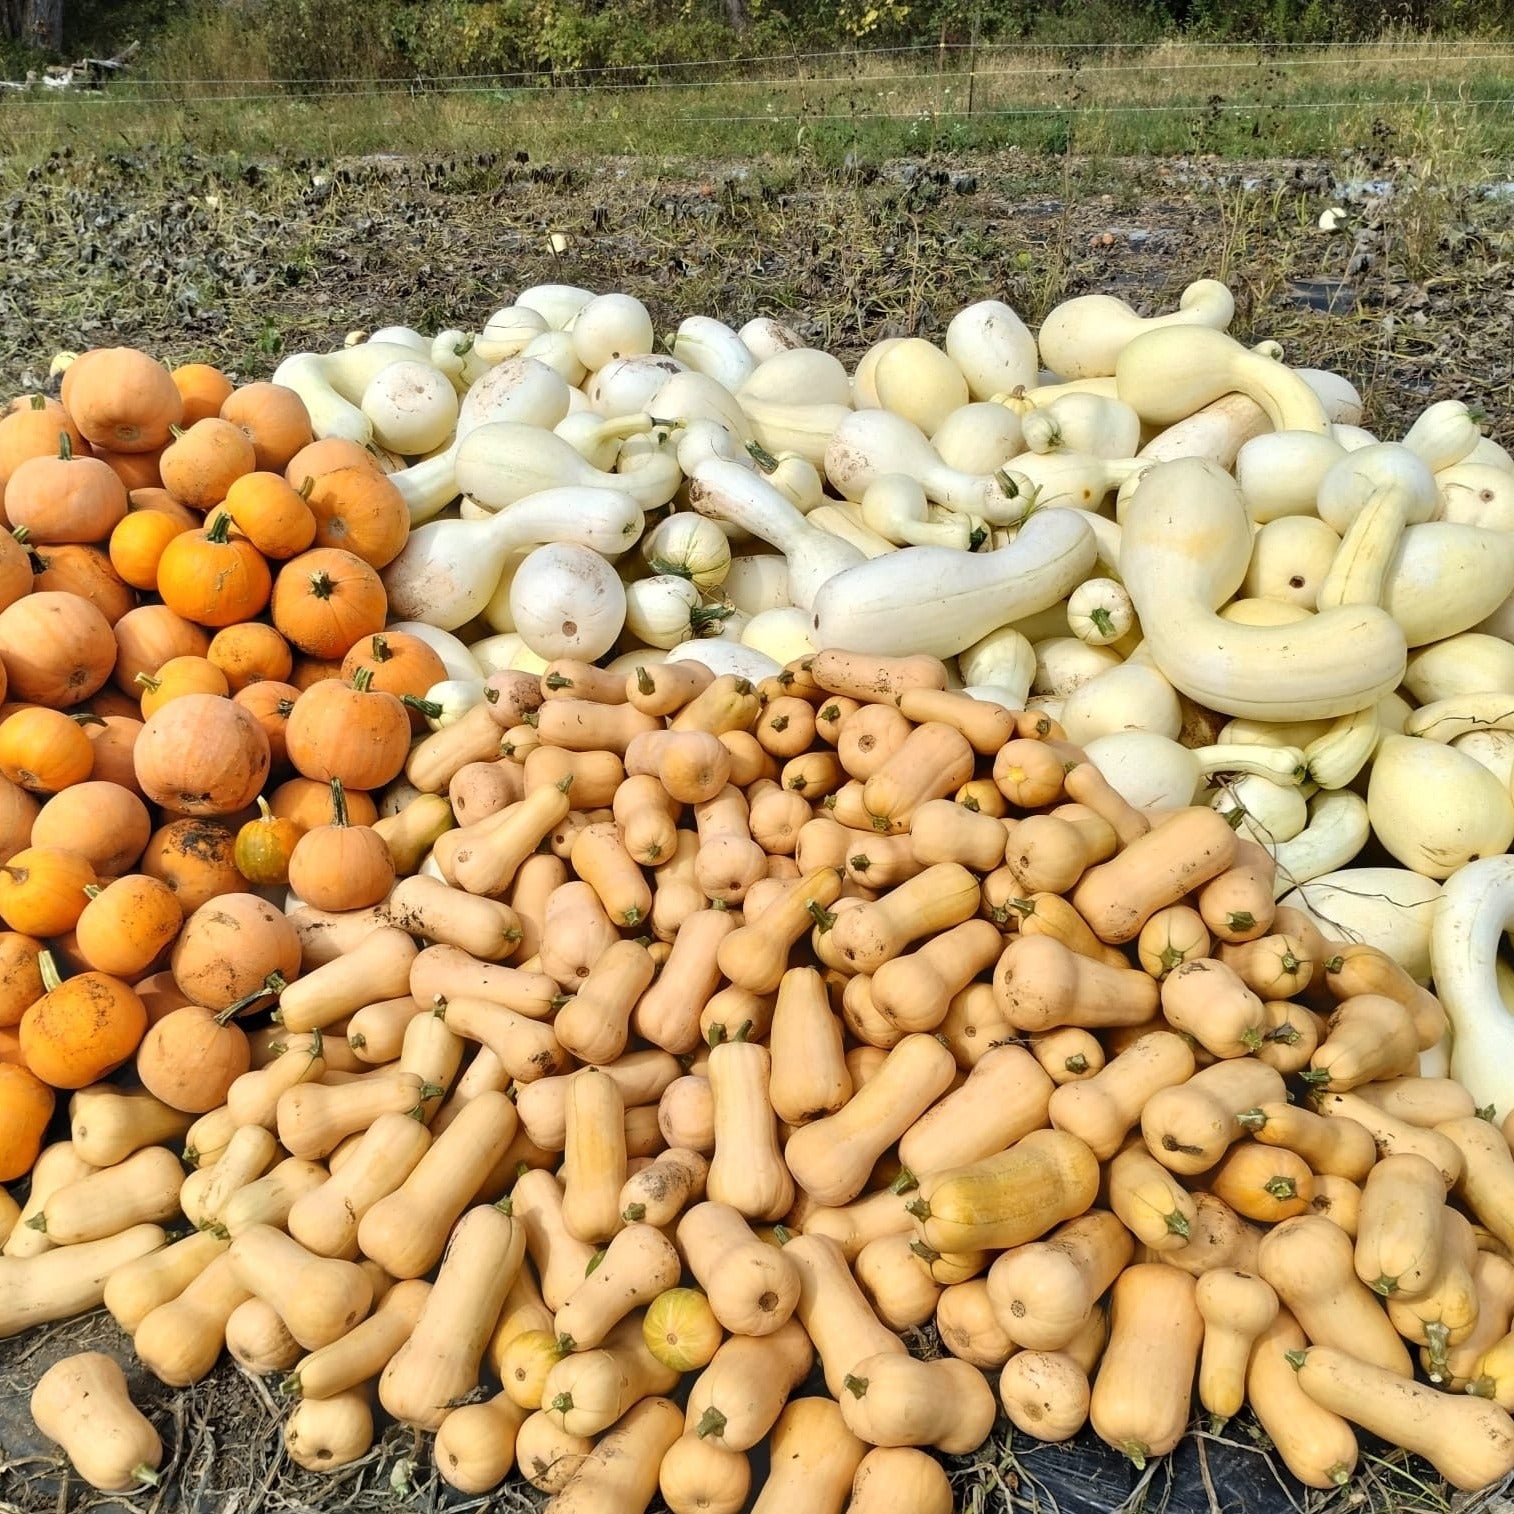 A giant pile of winter squash and pie pumpkins including a pile of waltham butternut at the front